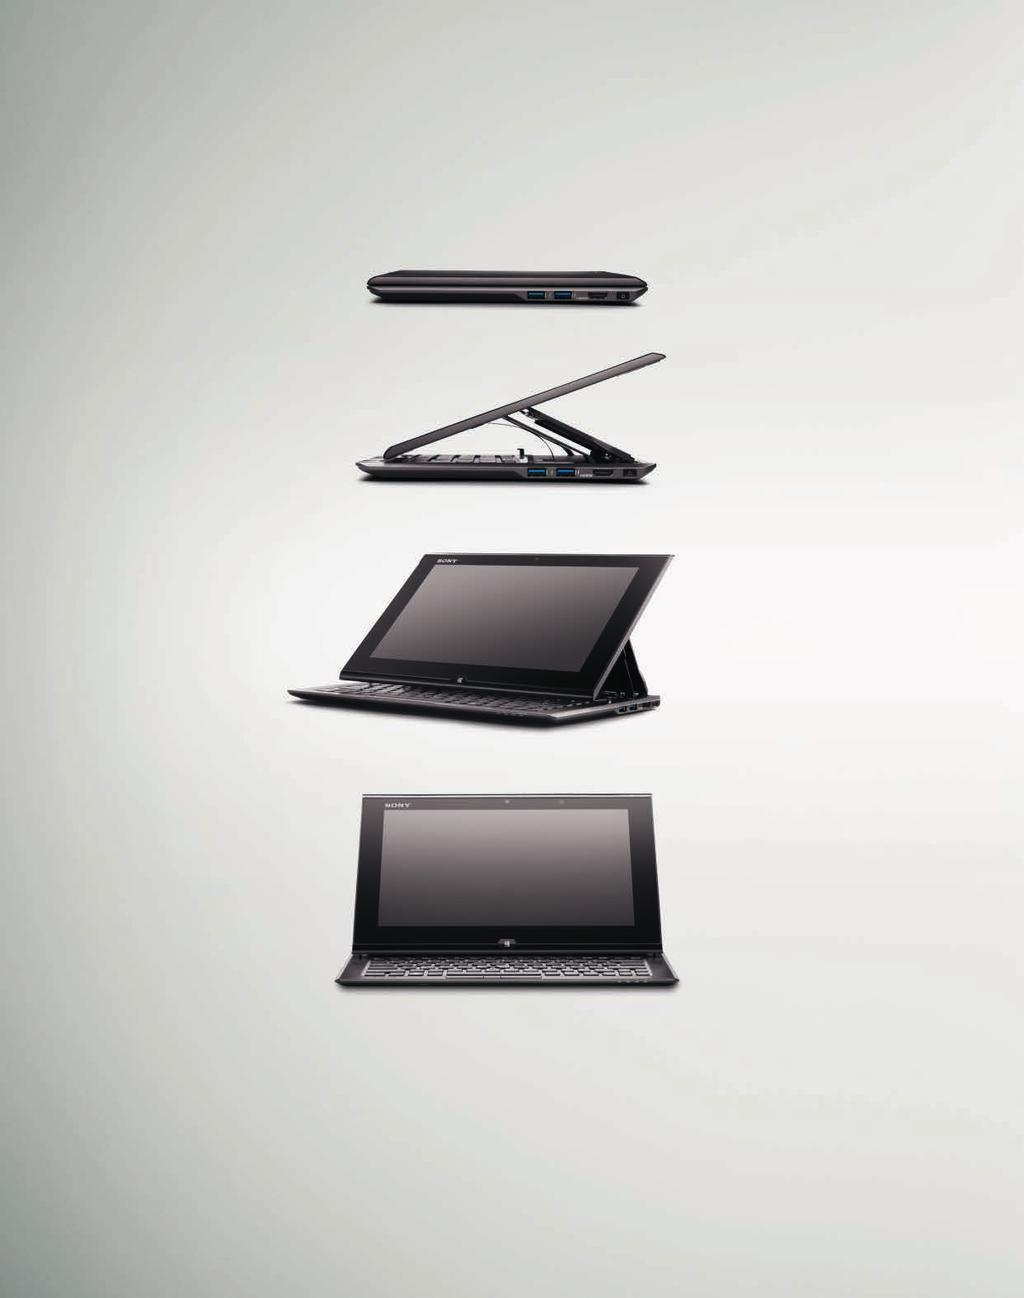 VAIO TM Duo 11 THERE S MORE TO THE TOUCH.